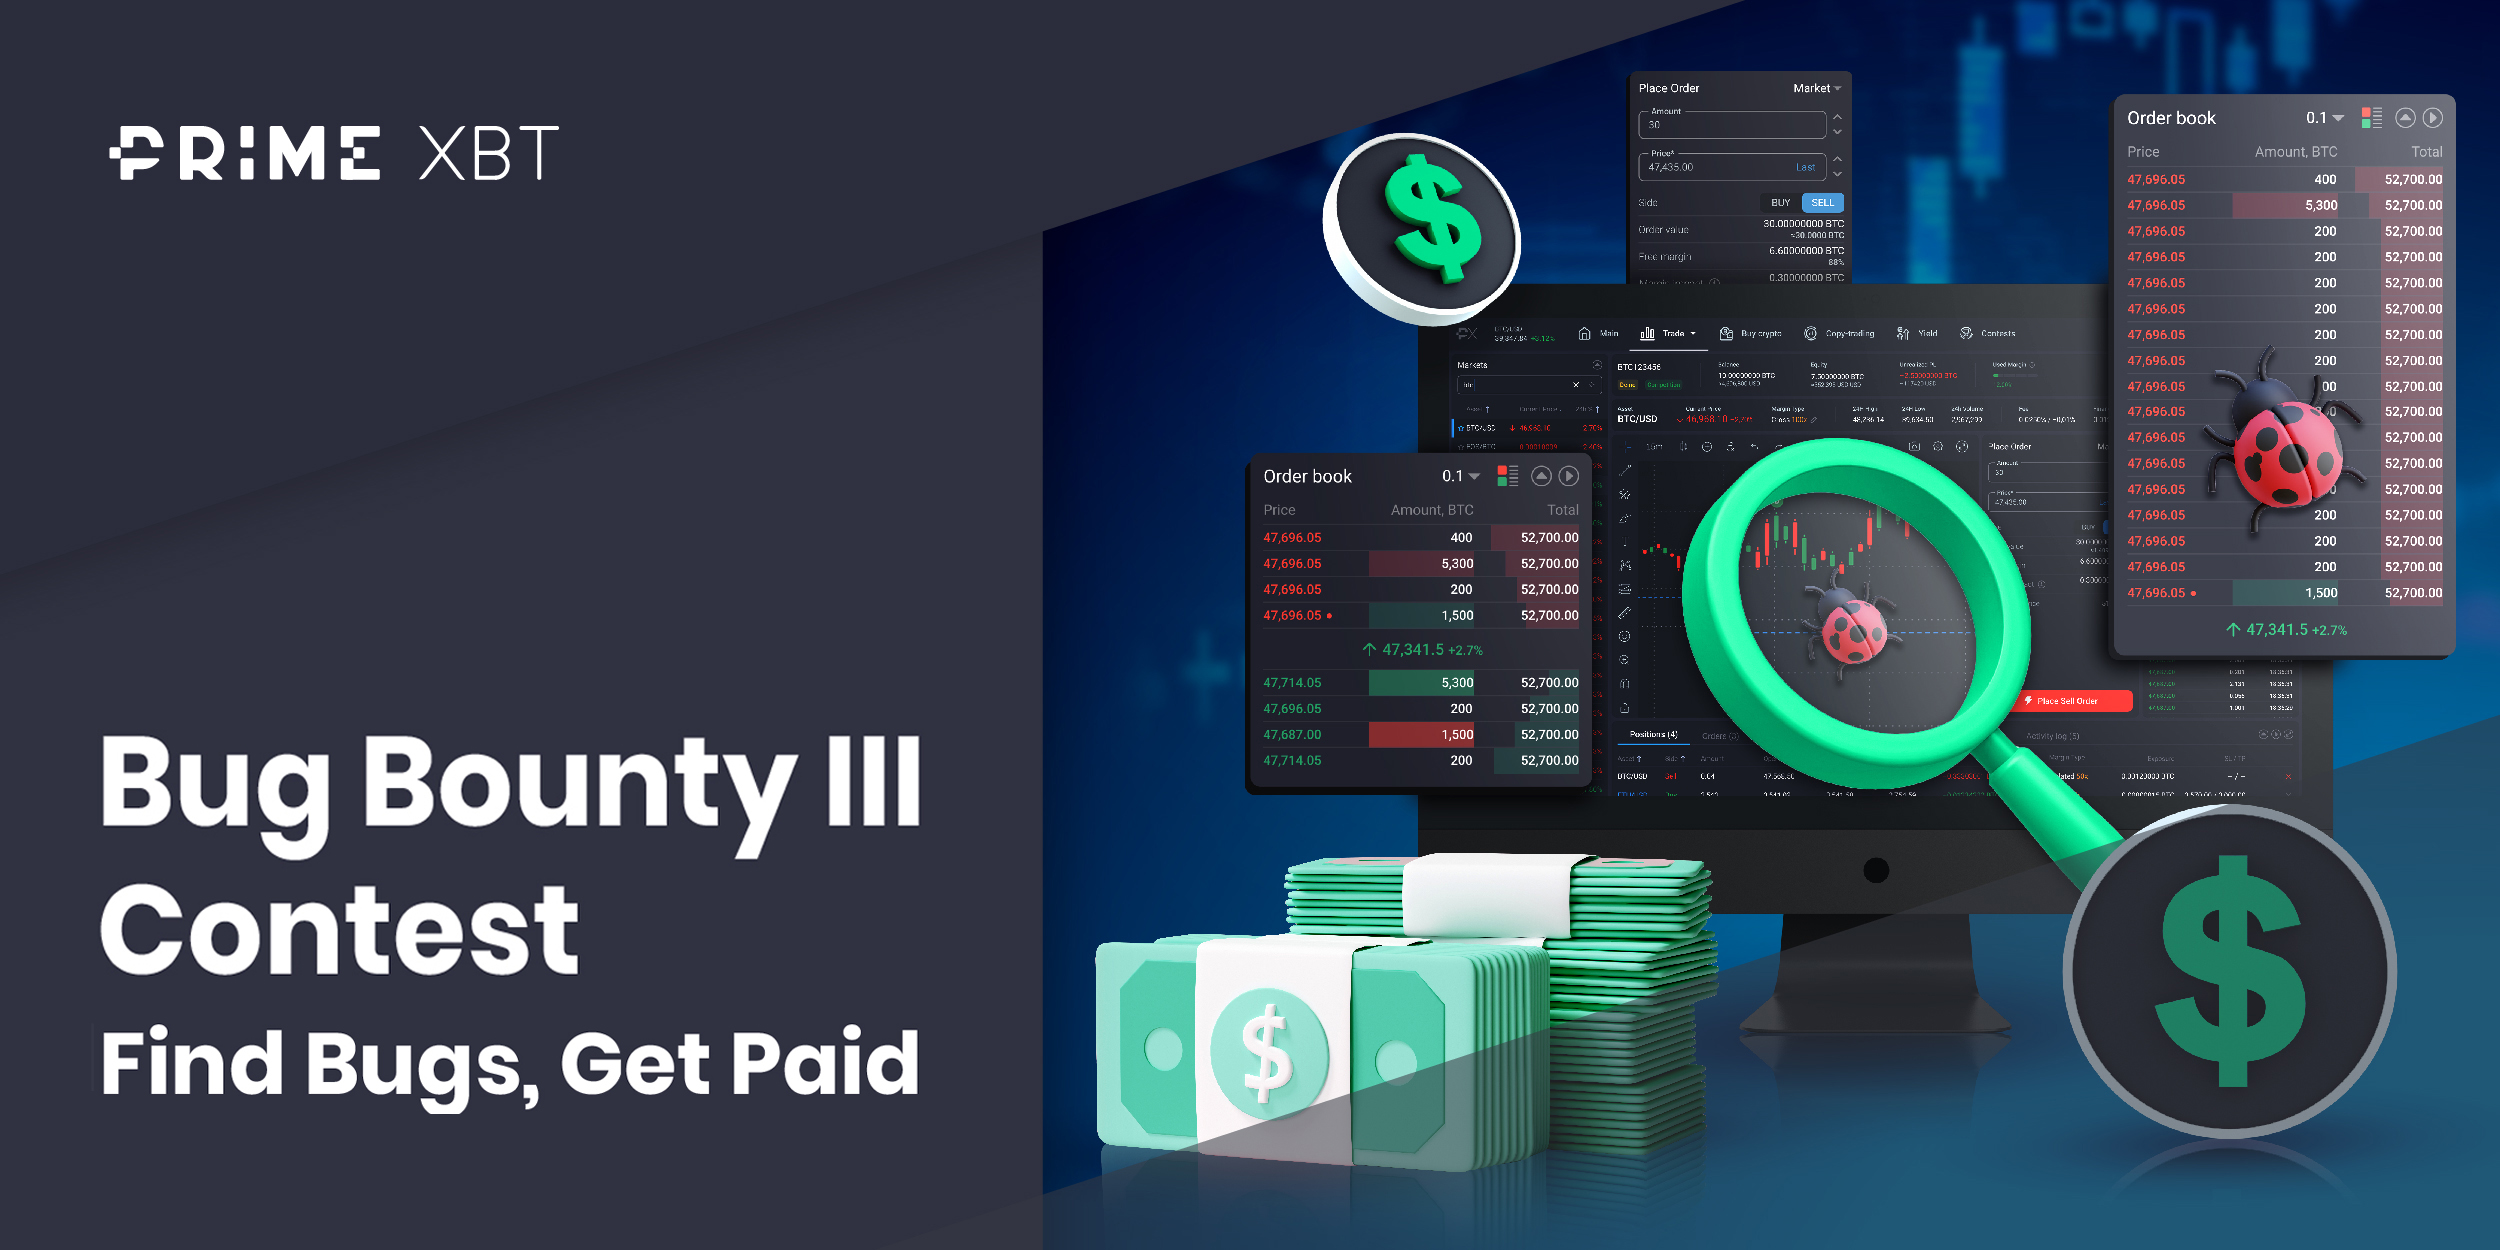 Test The All-New Top Coin Miners Crypto Futures Platform, Enter The $100,000+ Bug Bounty III Contest - Blog discord 08 02 2023 volatillity copy 24 volatillity copy 24